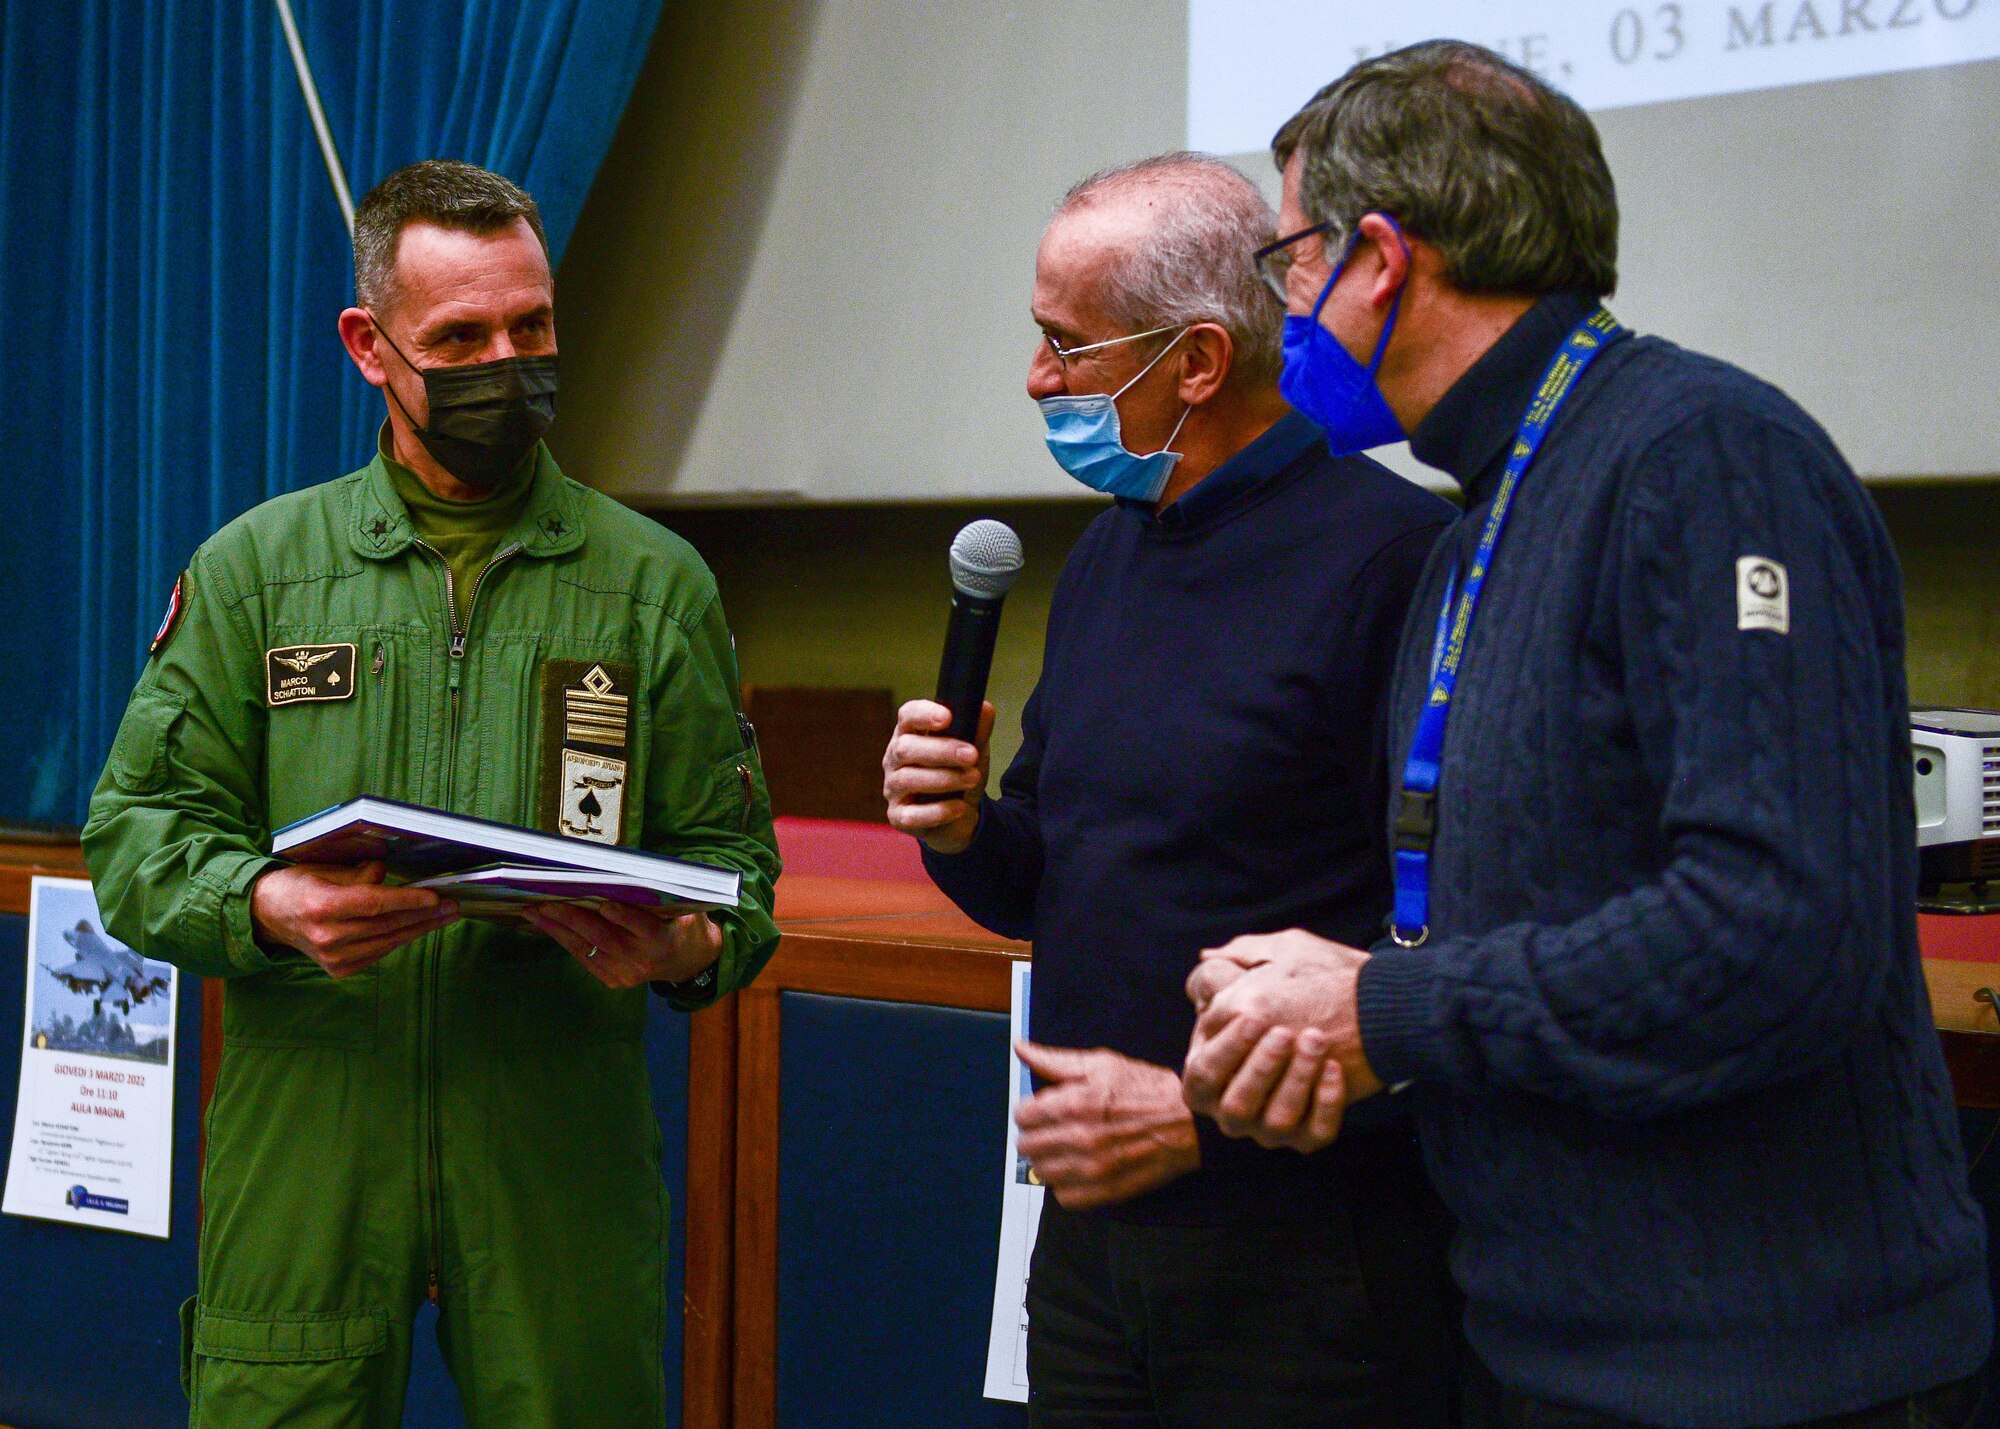 Italian air force Col. Marco Schiattoni, ‘Pagliano e Gori’ Airport commander, receives a gift from the Malignani Aeronautical Institute principal in Udine, Italy, March 3, 2022. The school is considered one of the biggest Italian technical high schools in terms of the number of students. (U.S. Air Force photo by Senior Airman Brooke Moeder)